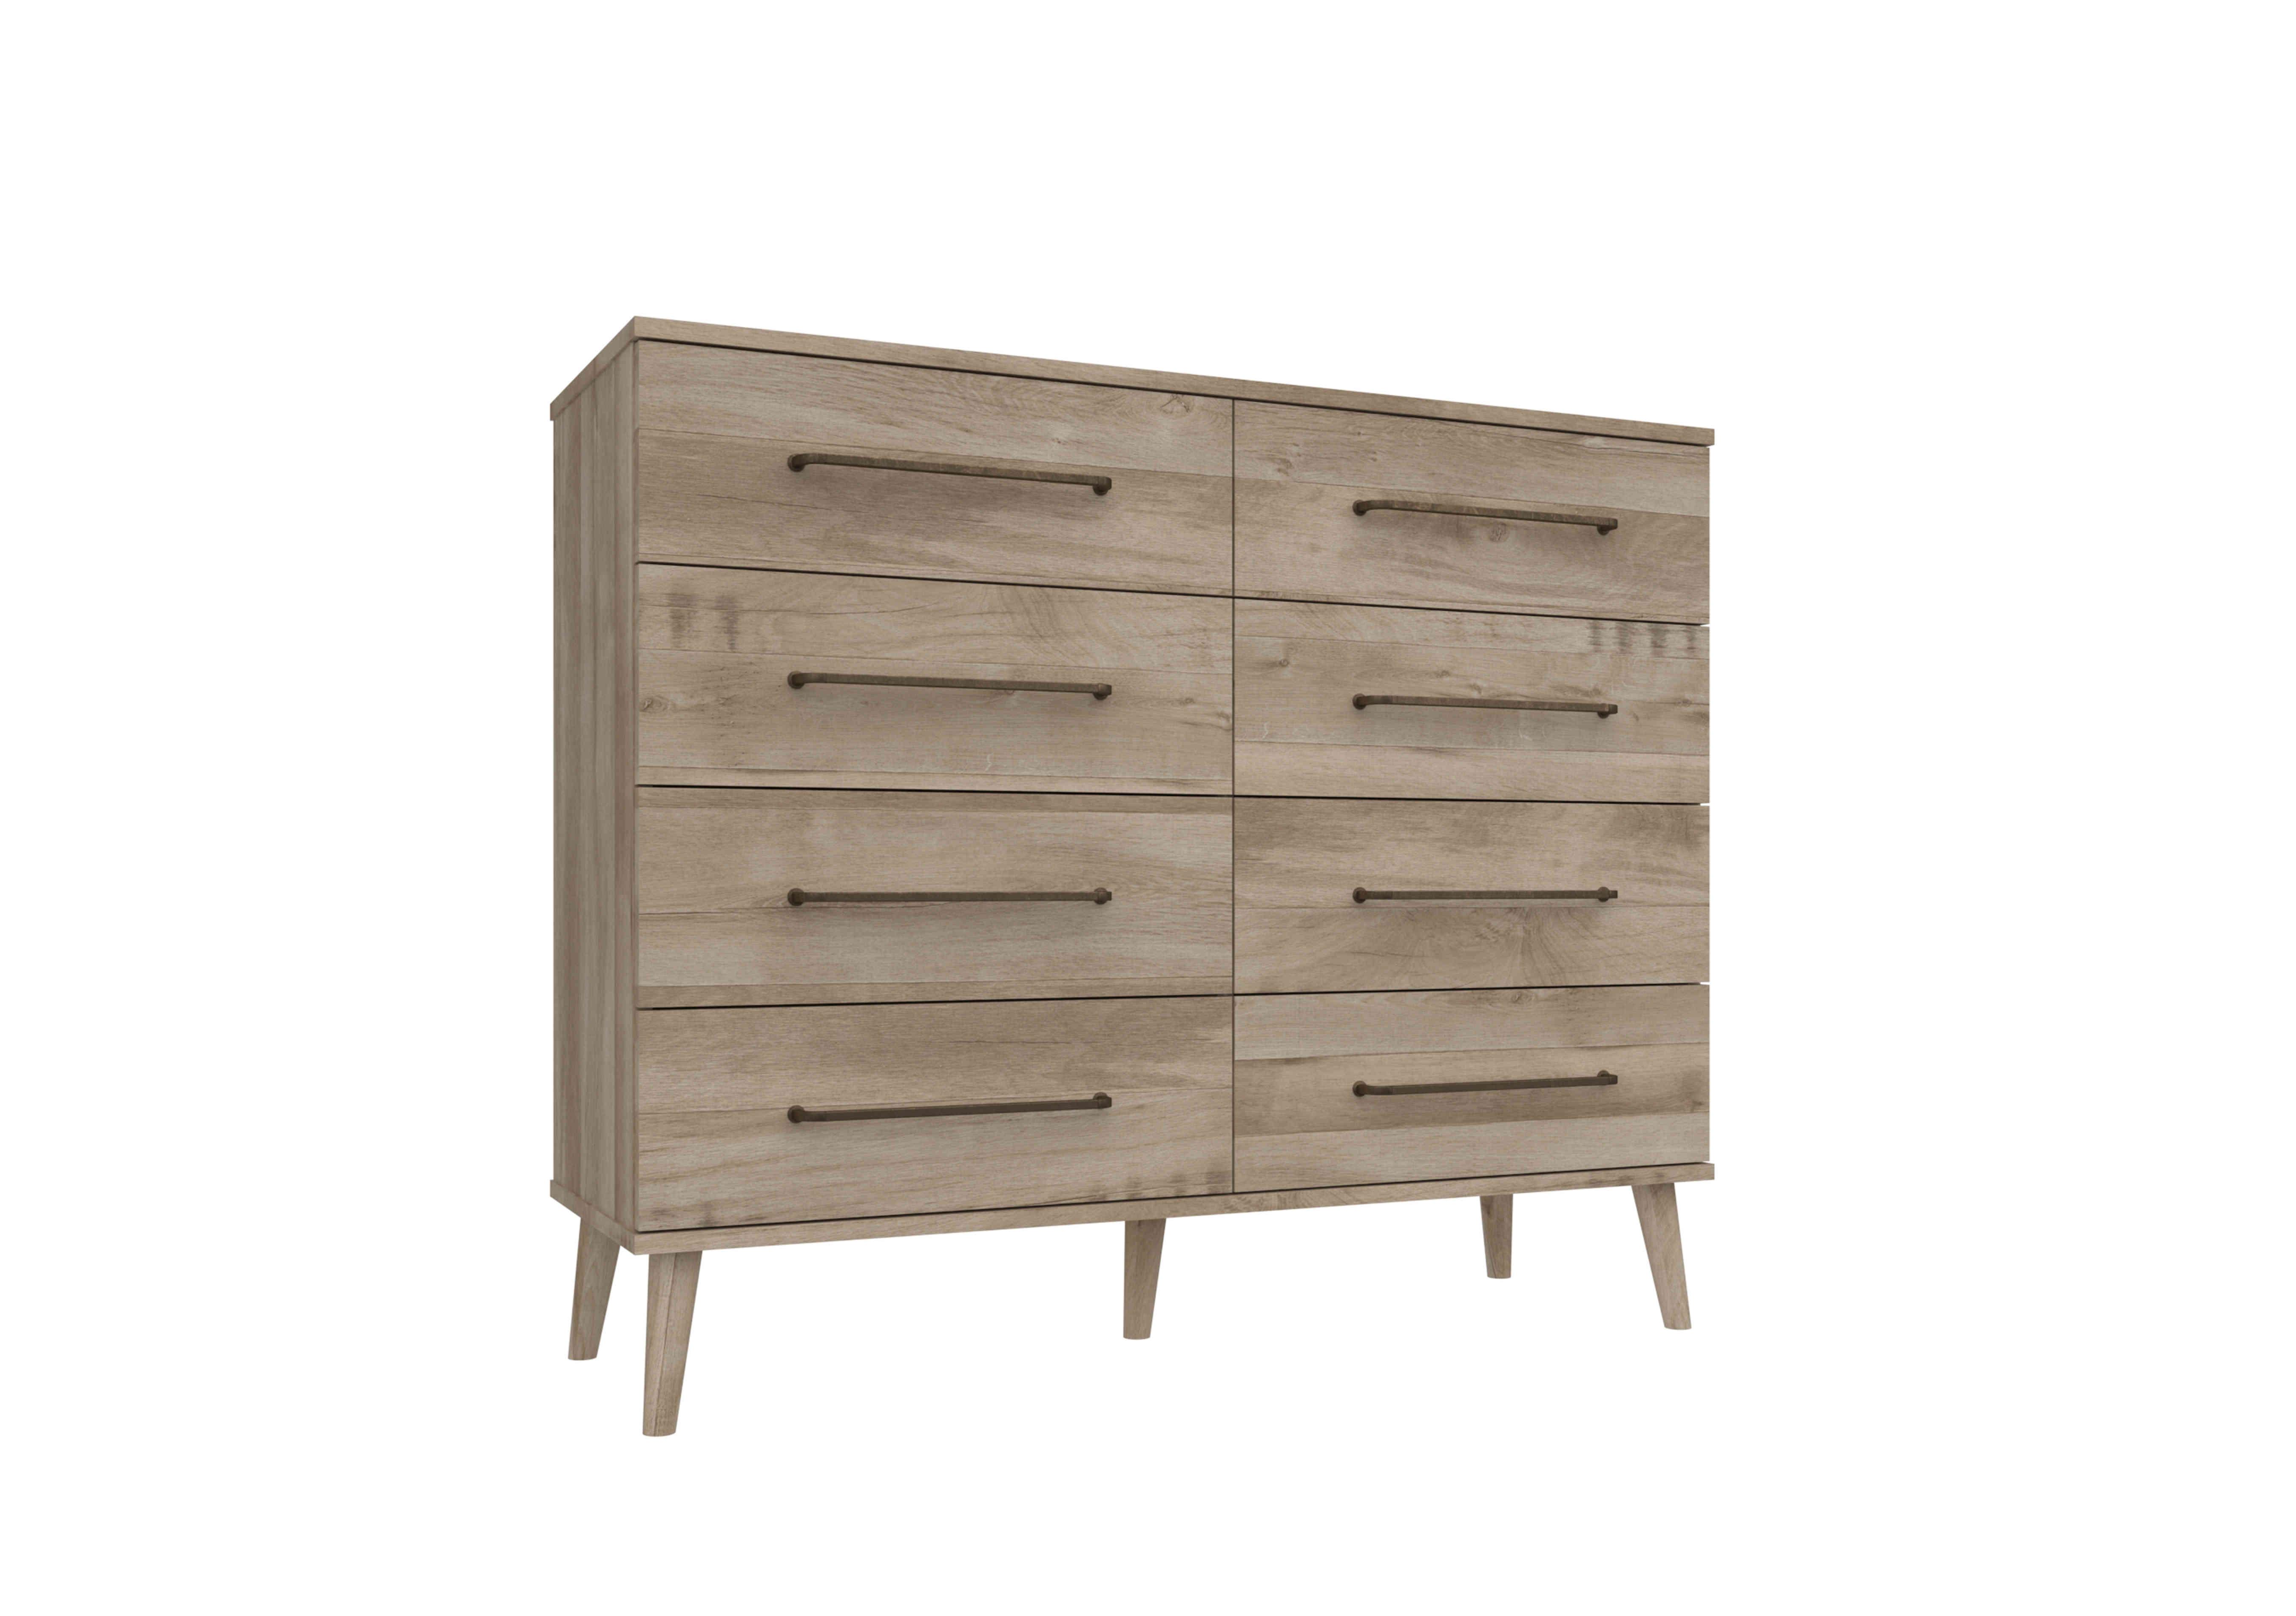 Finchley 8 Drawer Chest in Italian Natural Oak on Furniture Village